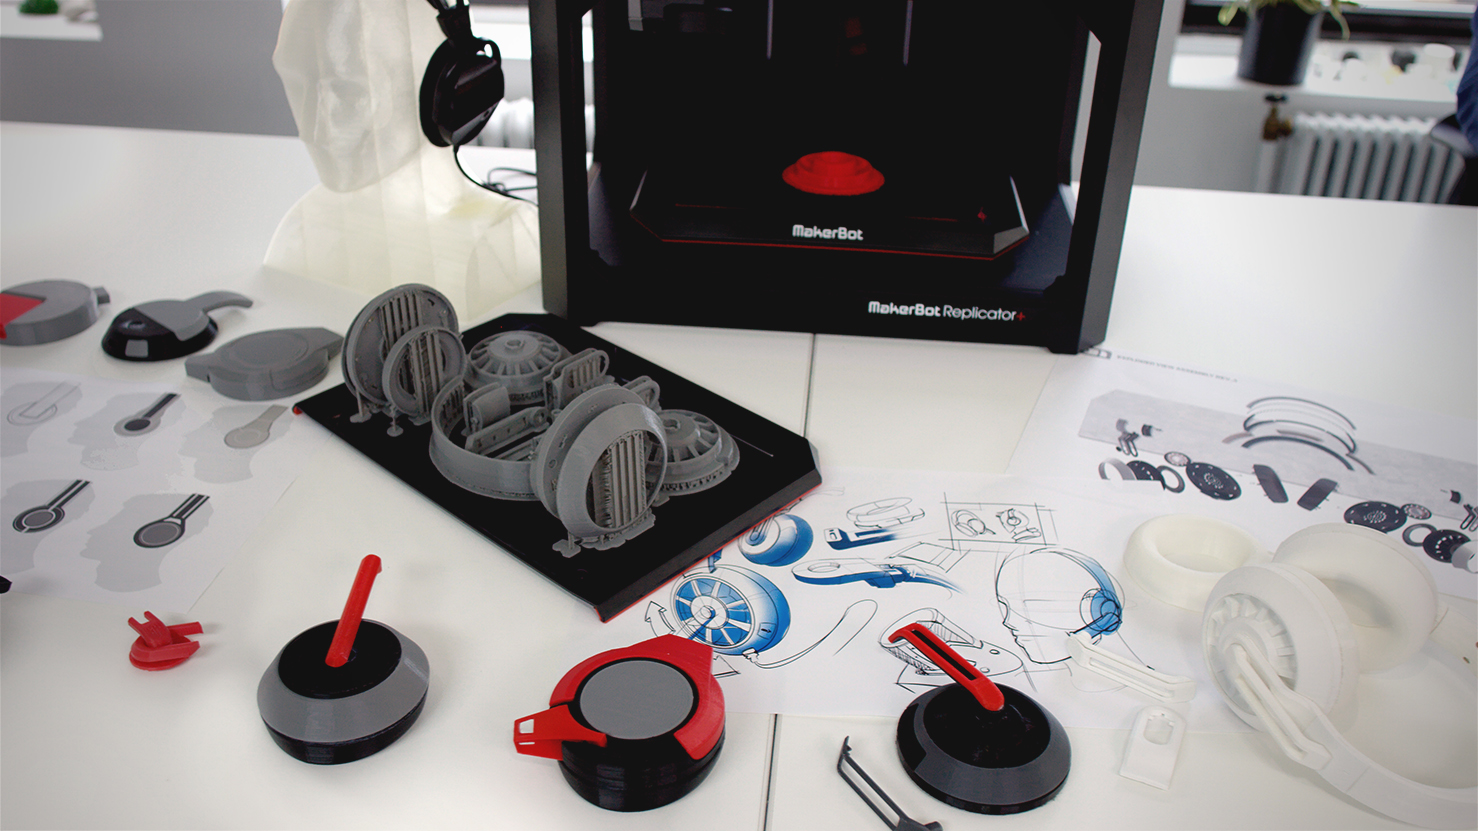  The new MakerBot Replicator+ and its ecosystem 